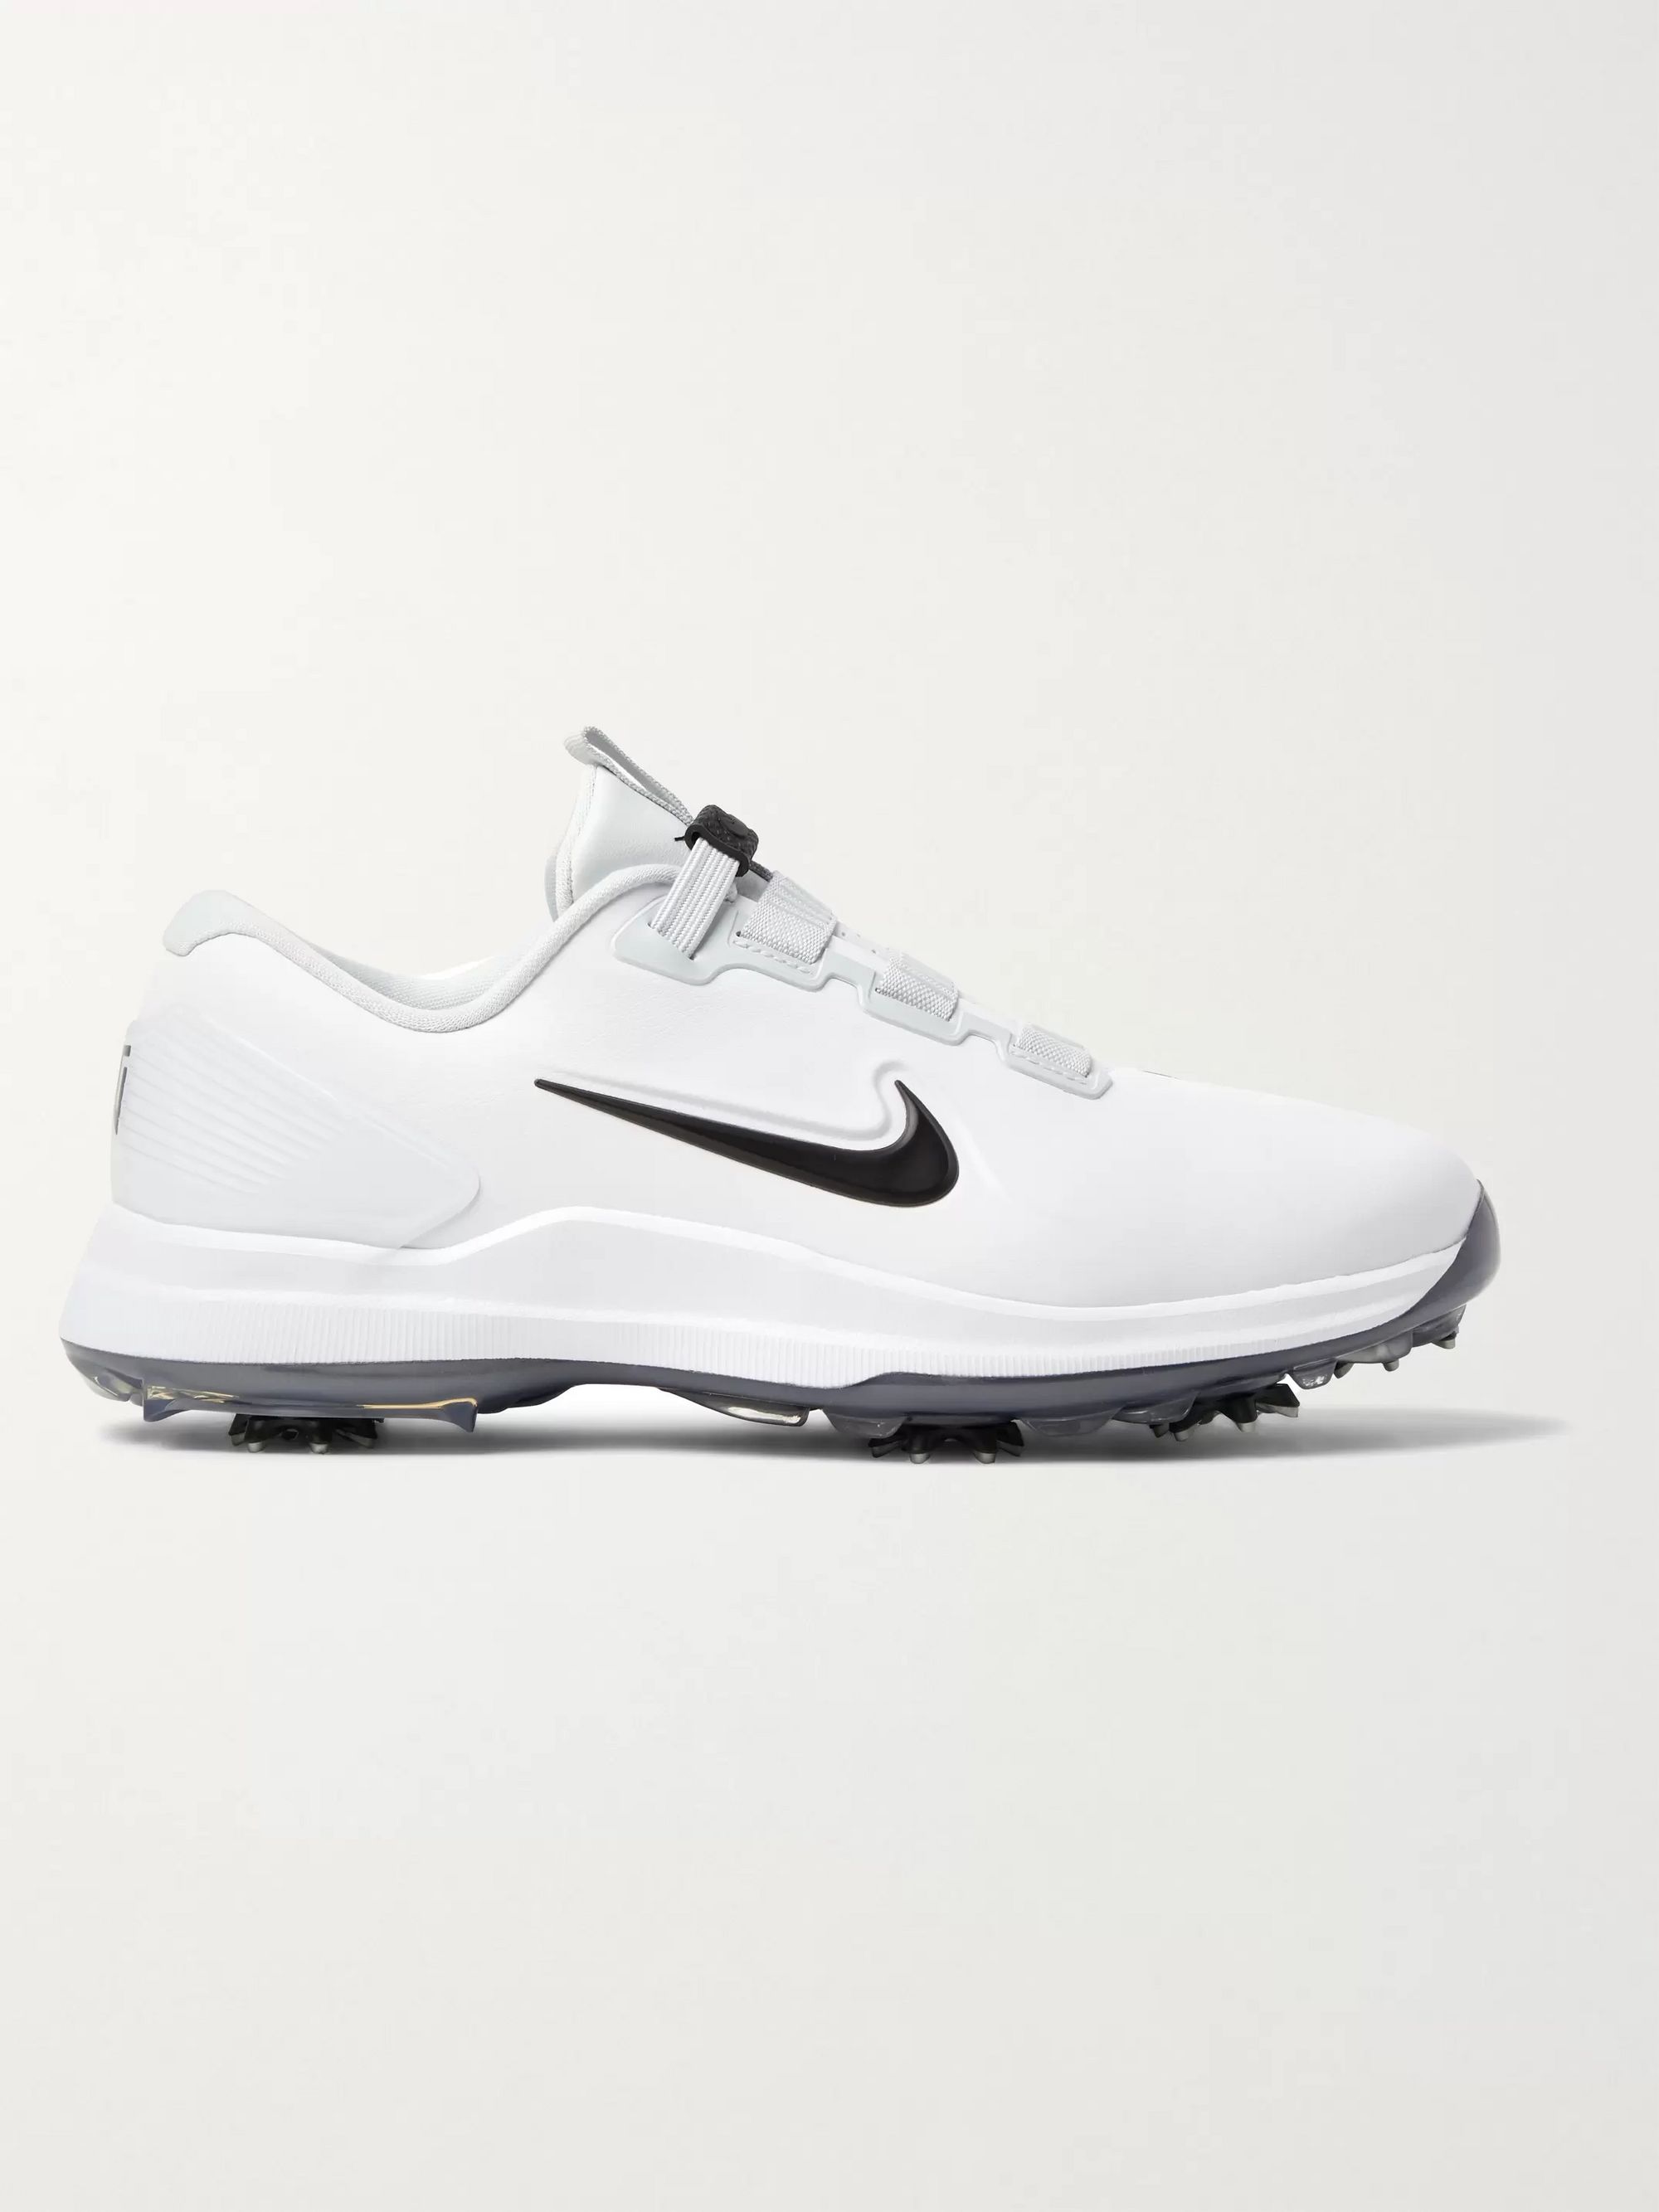 new nike golf shoes 2019